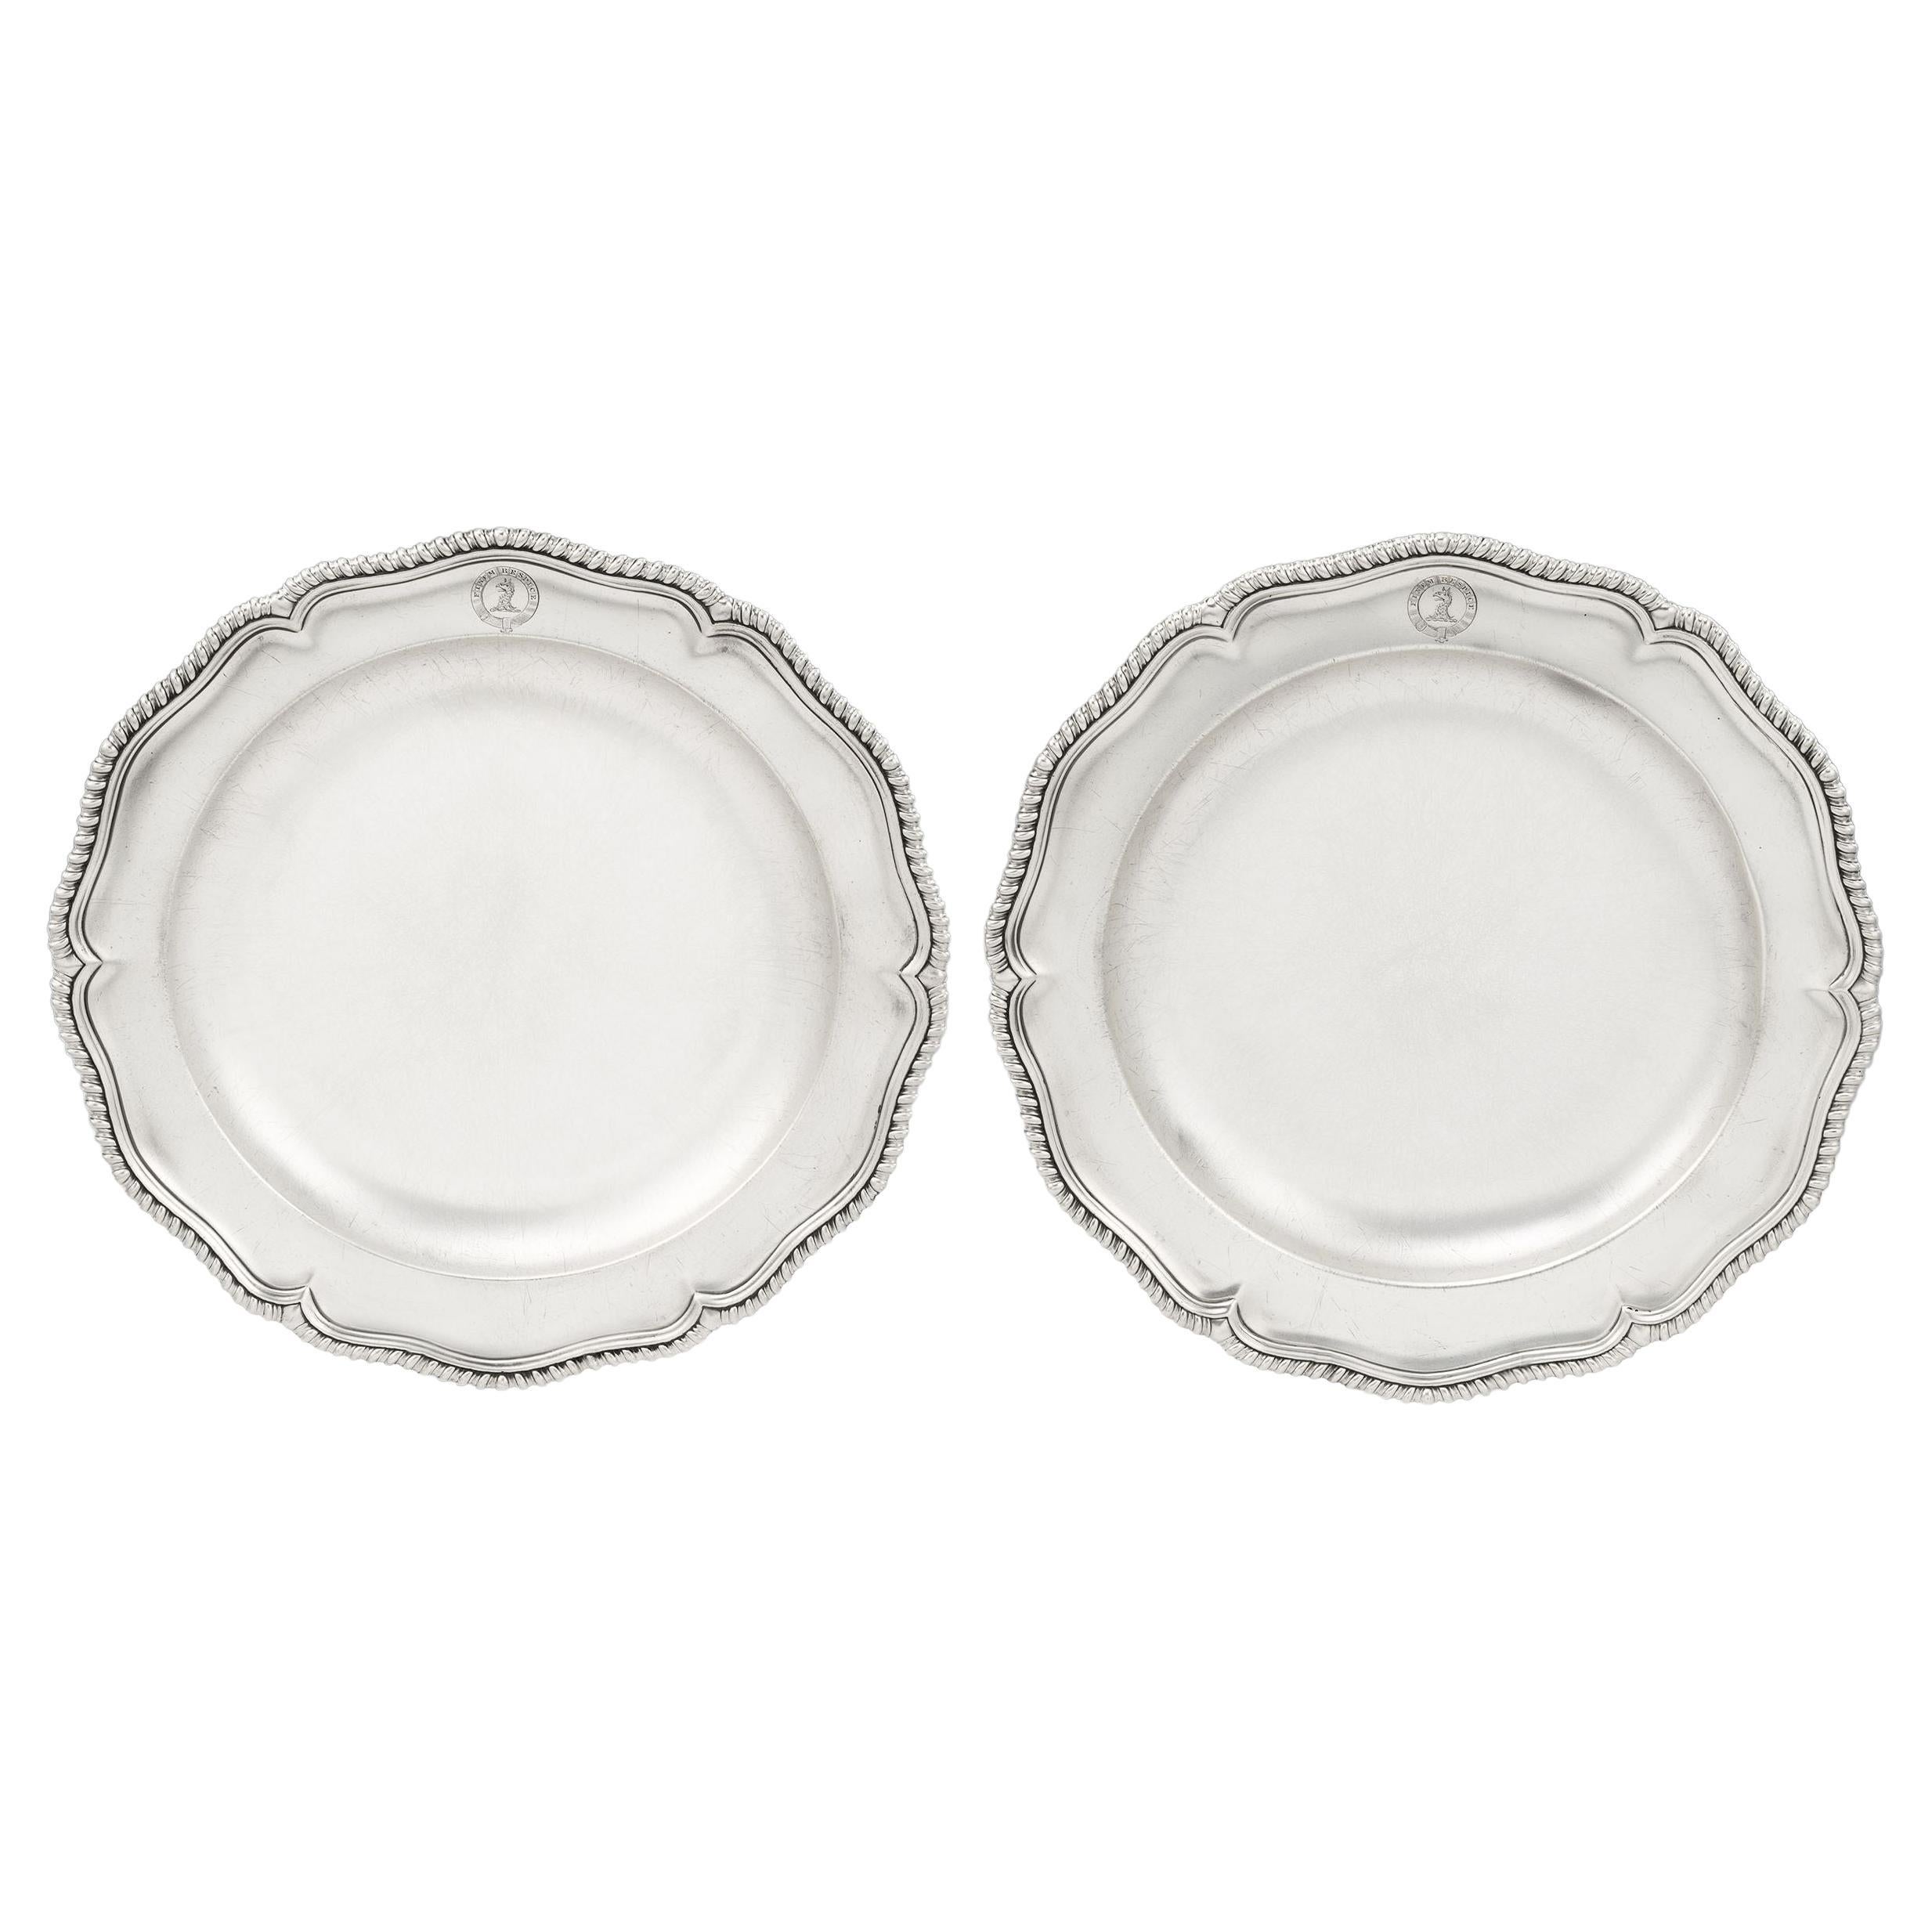 Pair of George II Serving Dishes Made in London in 1759 by William Cripps For Sale